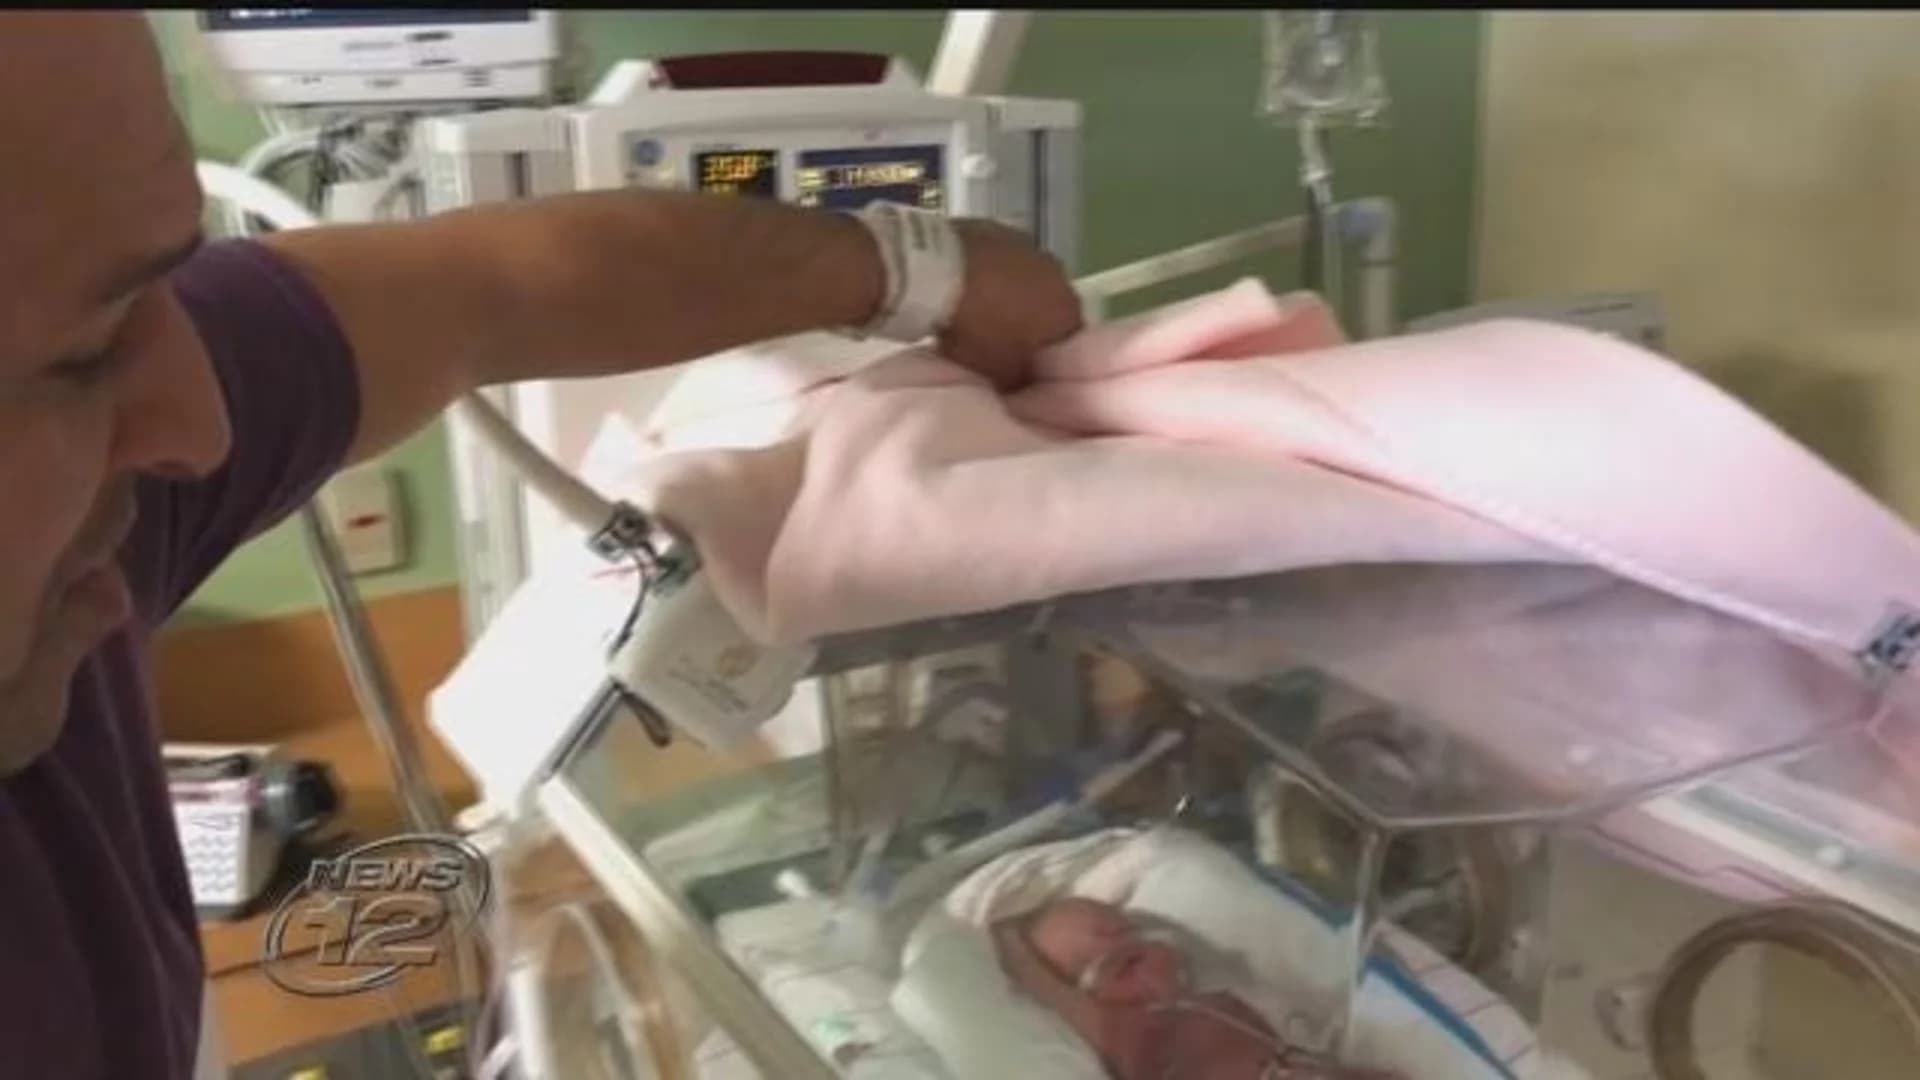 Full house: New Jersey mom gives birth to rare set of quintuplets